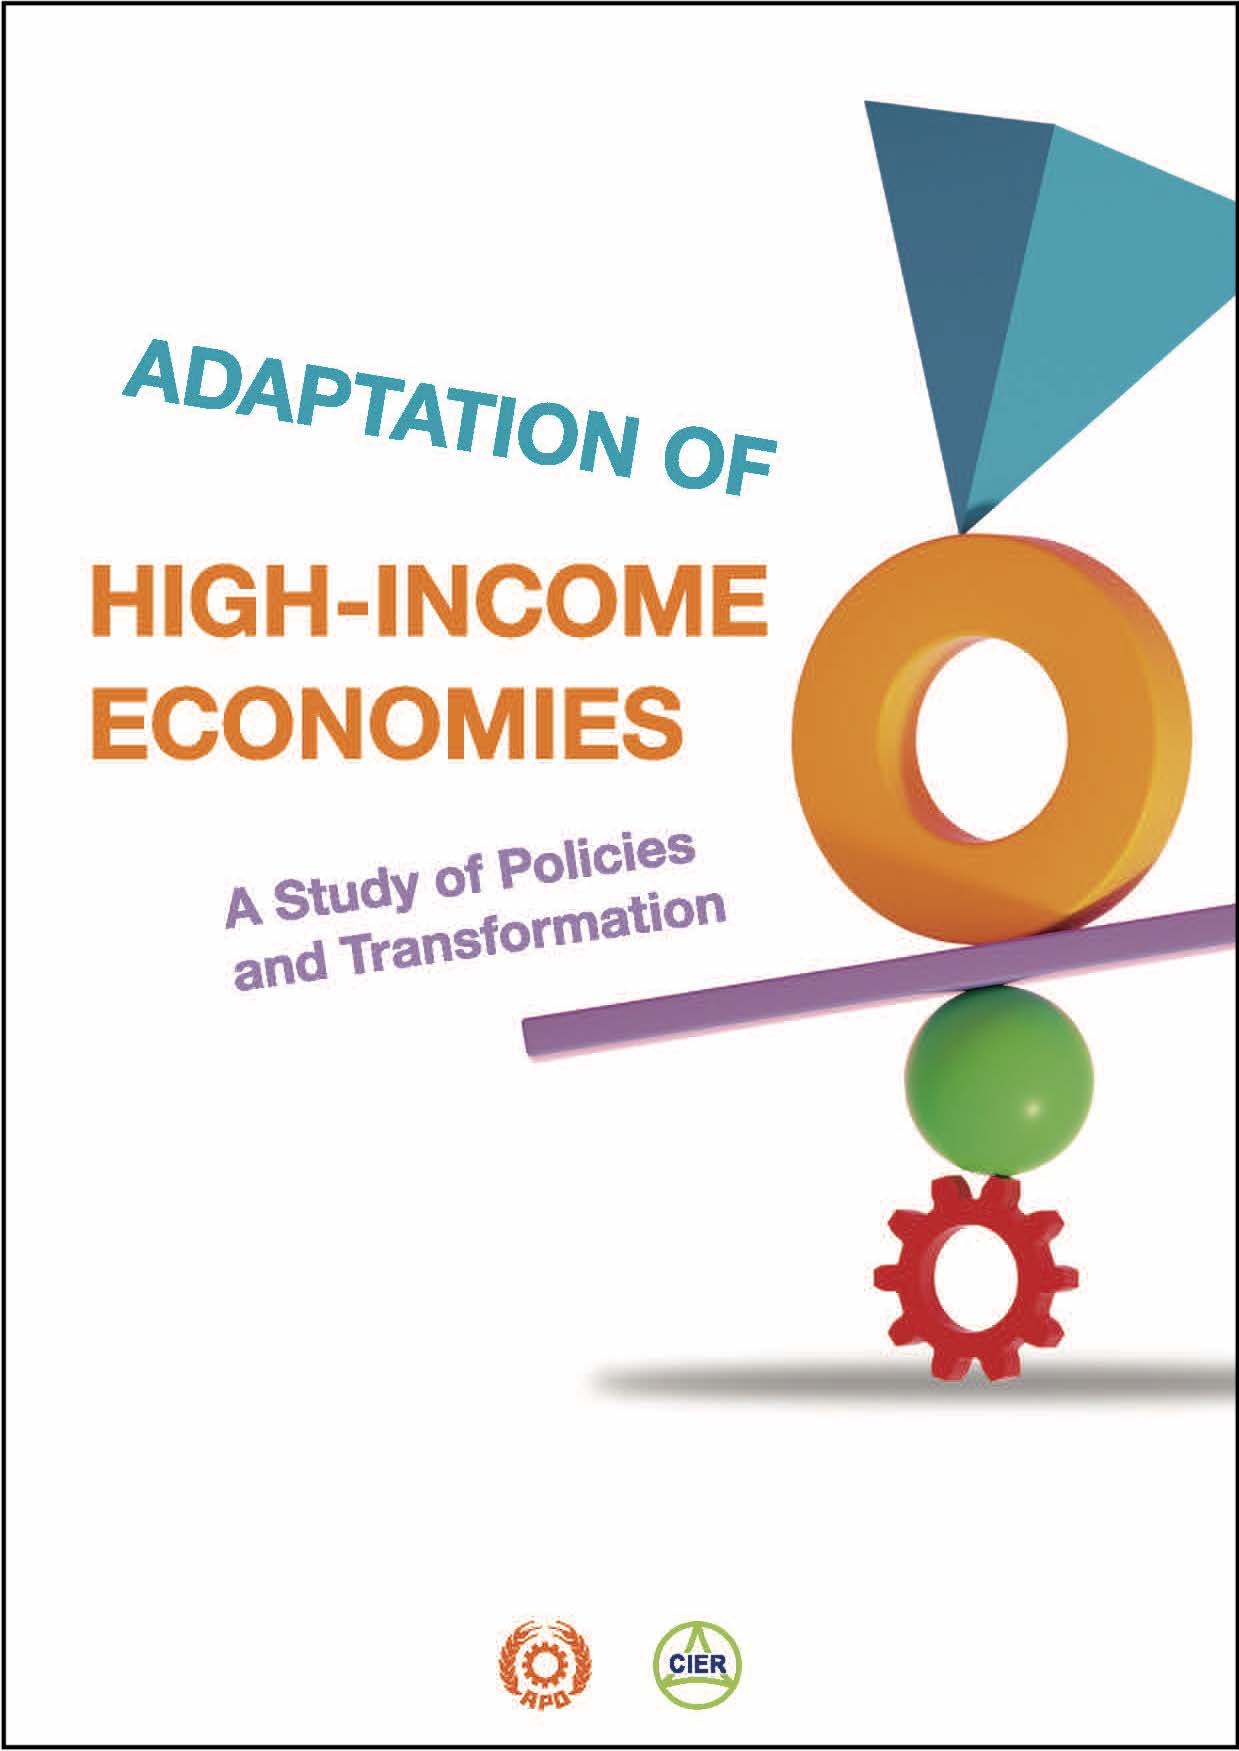 ADAPTATION OF HIGH INCOME ECONOMIES: A Study of Policies and Transformation